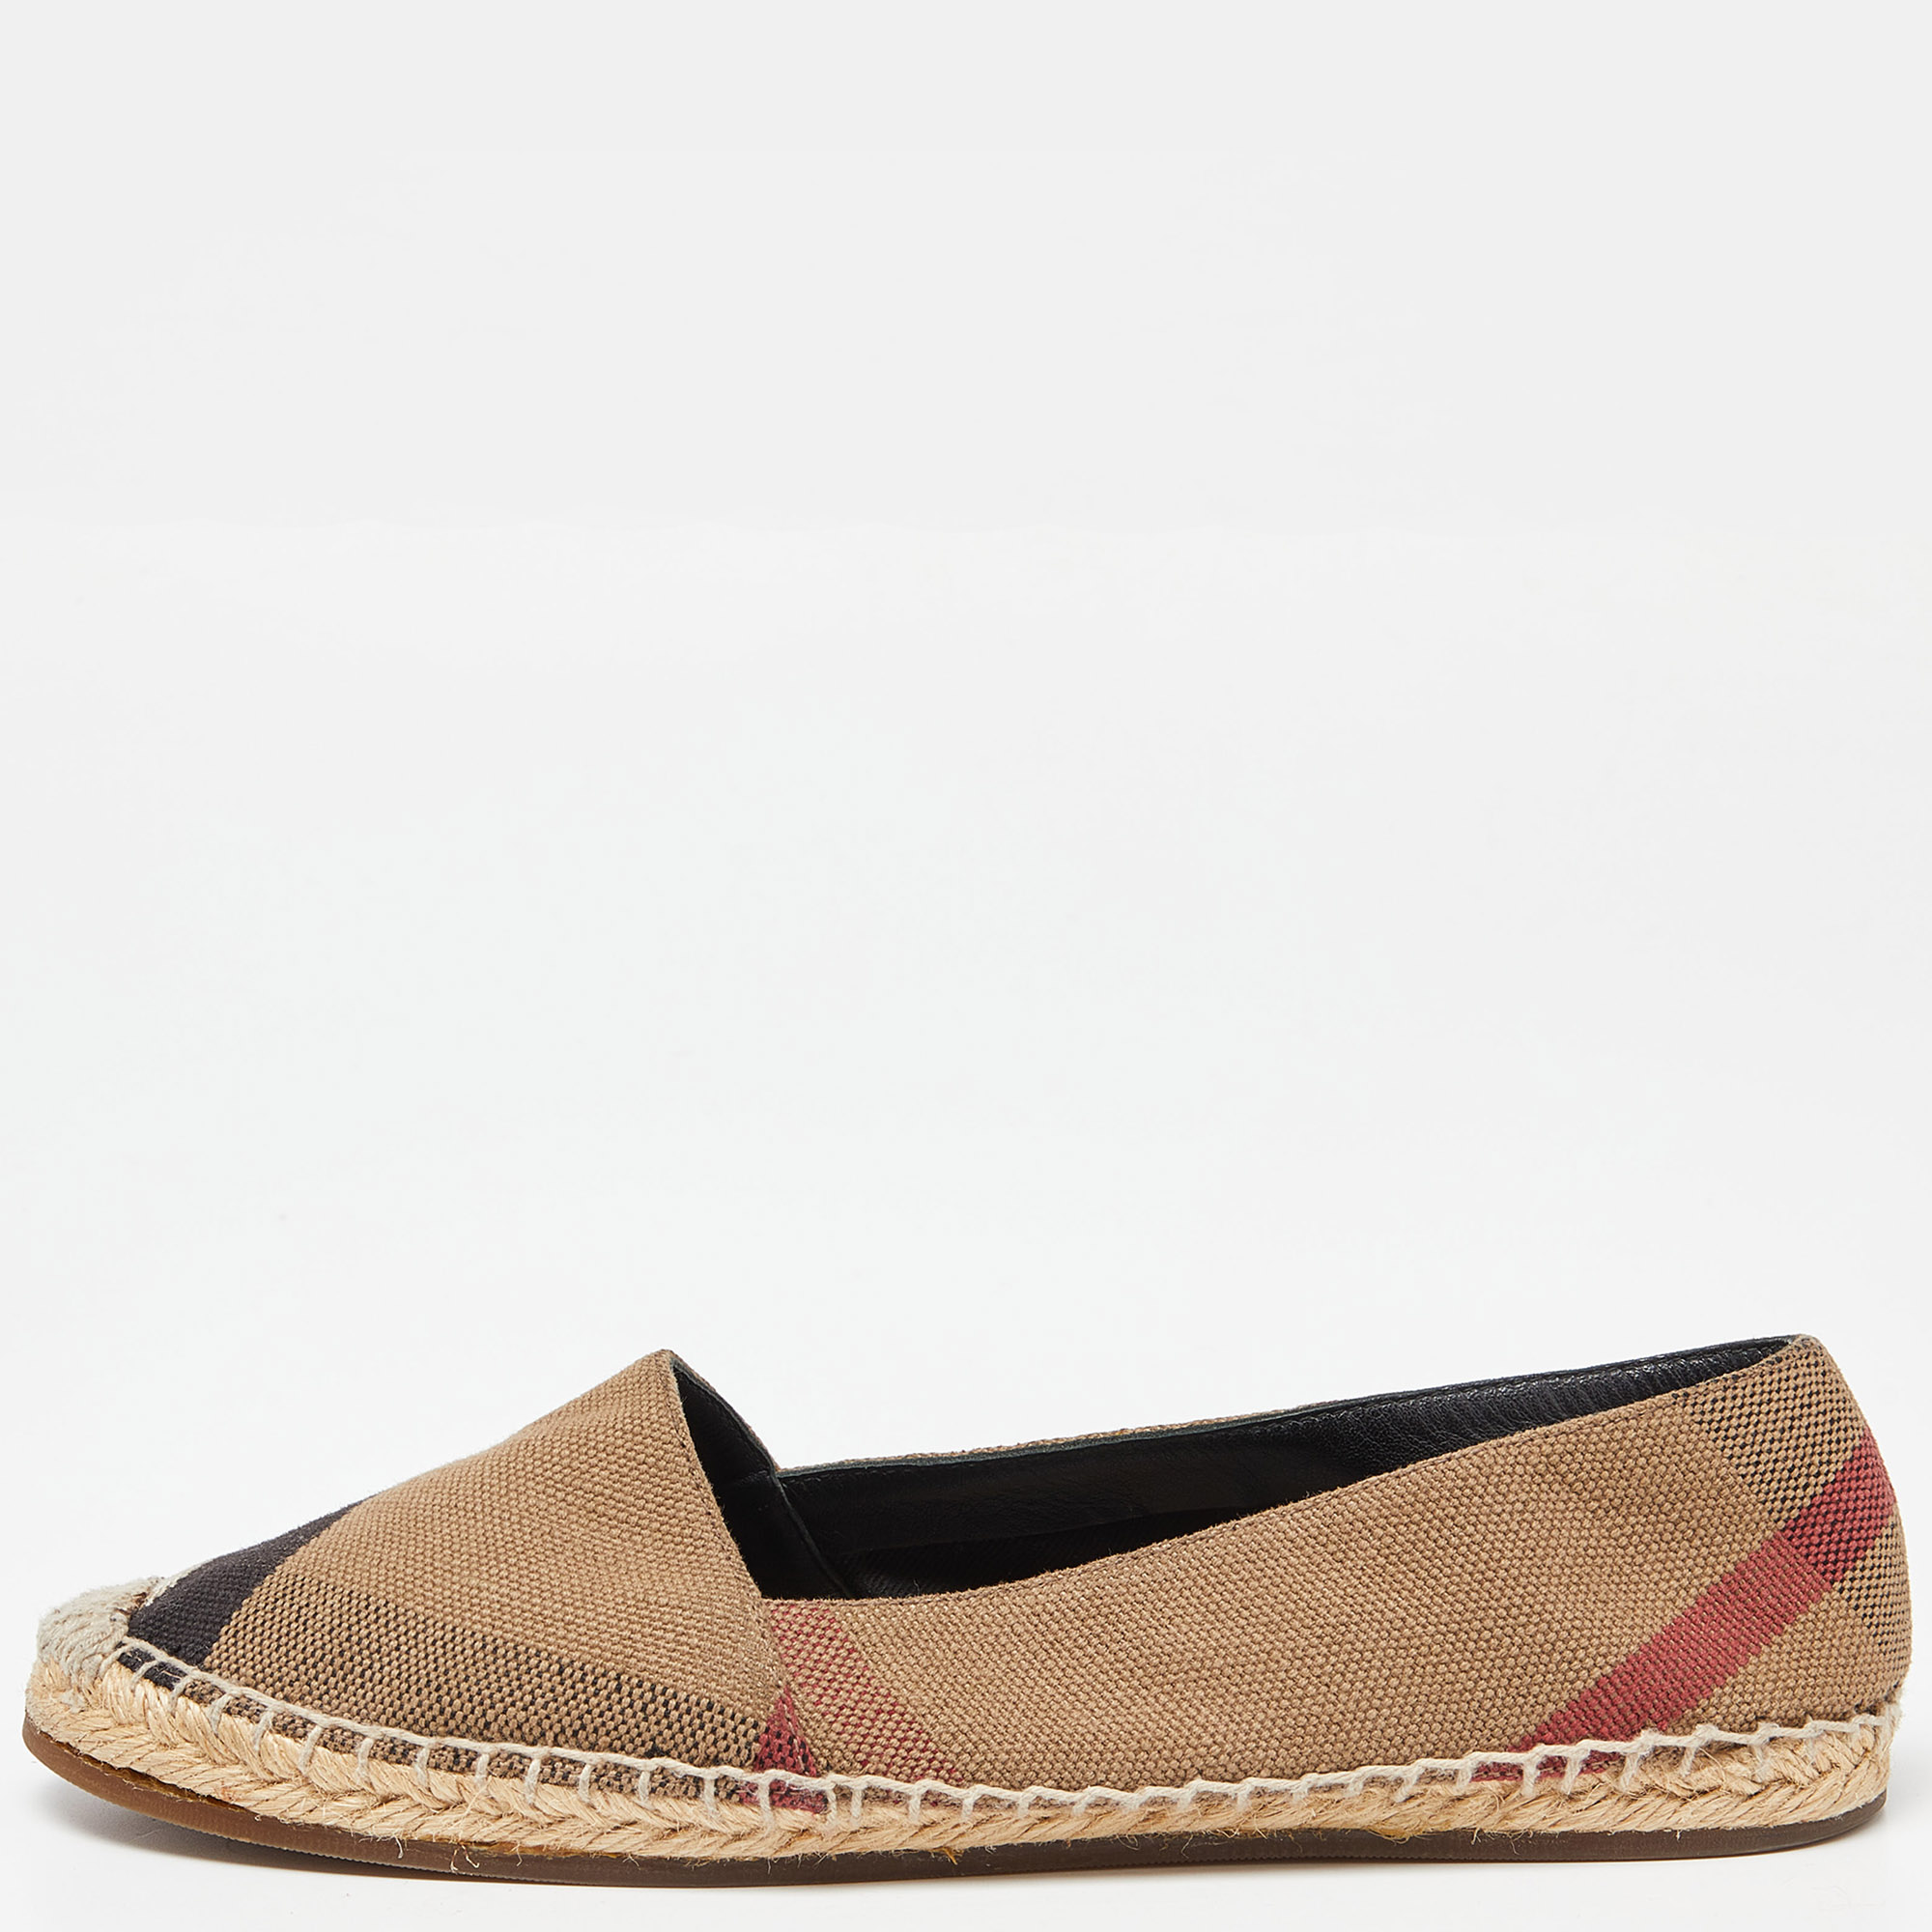 Burberry Brown House Check Canvas Espadrille Flats Size 37